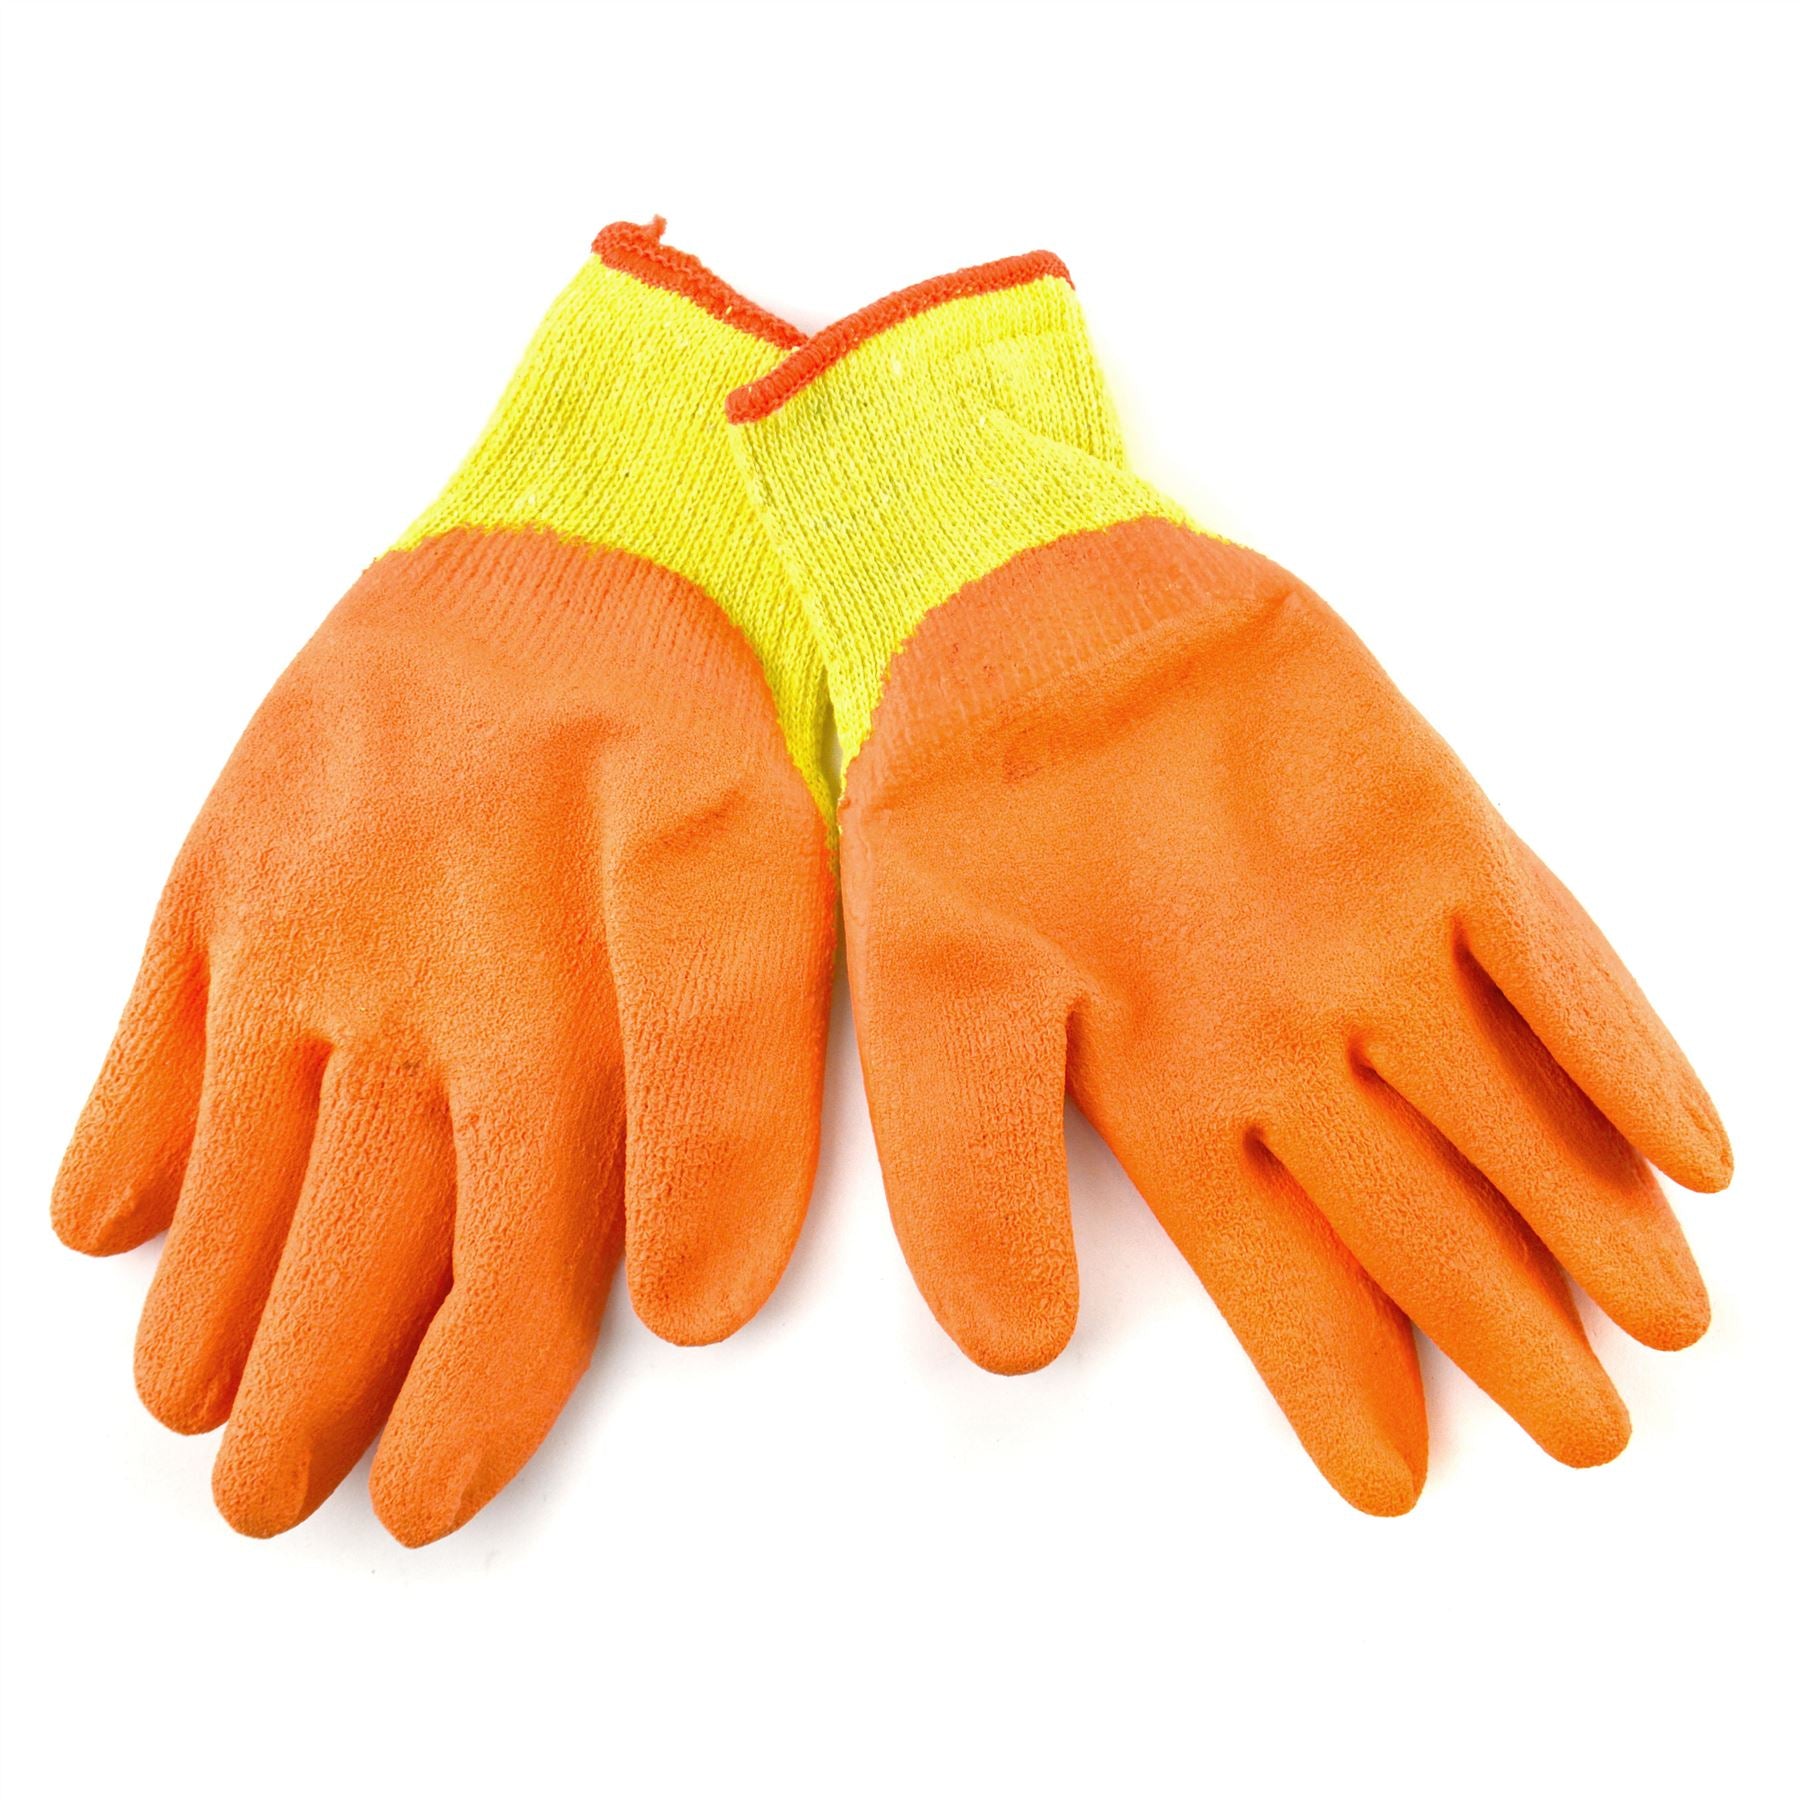 Medium Size 8 Polycotton Latex Rubber Coated Protective Work Gloves 12 Pair